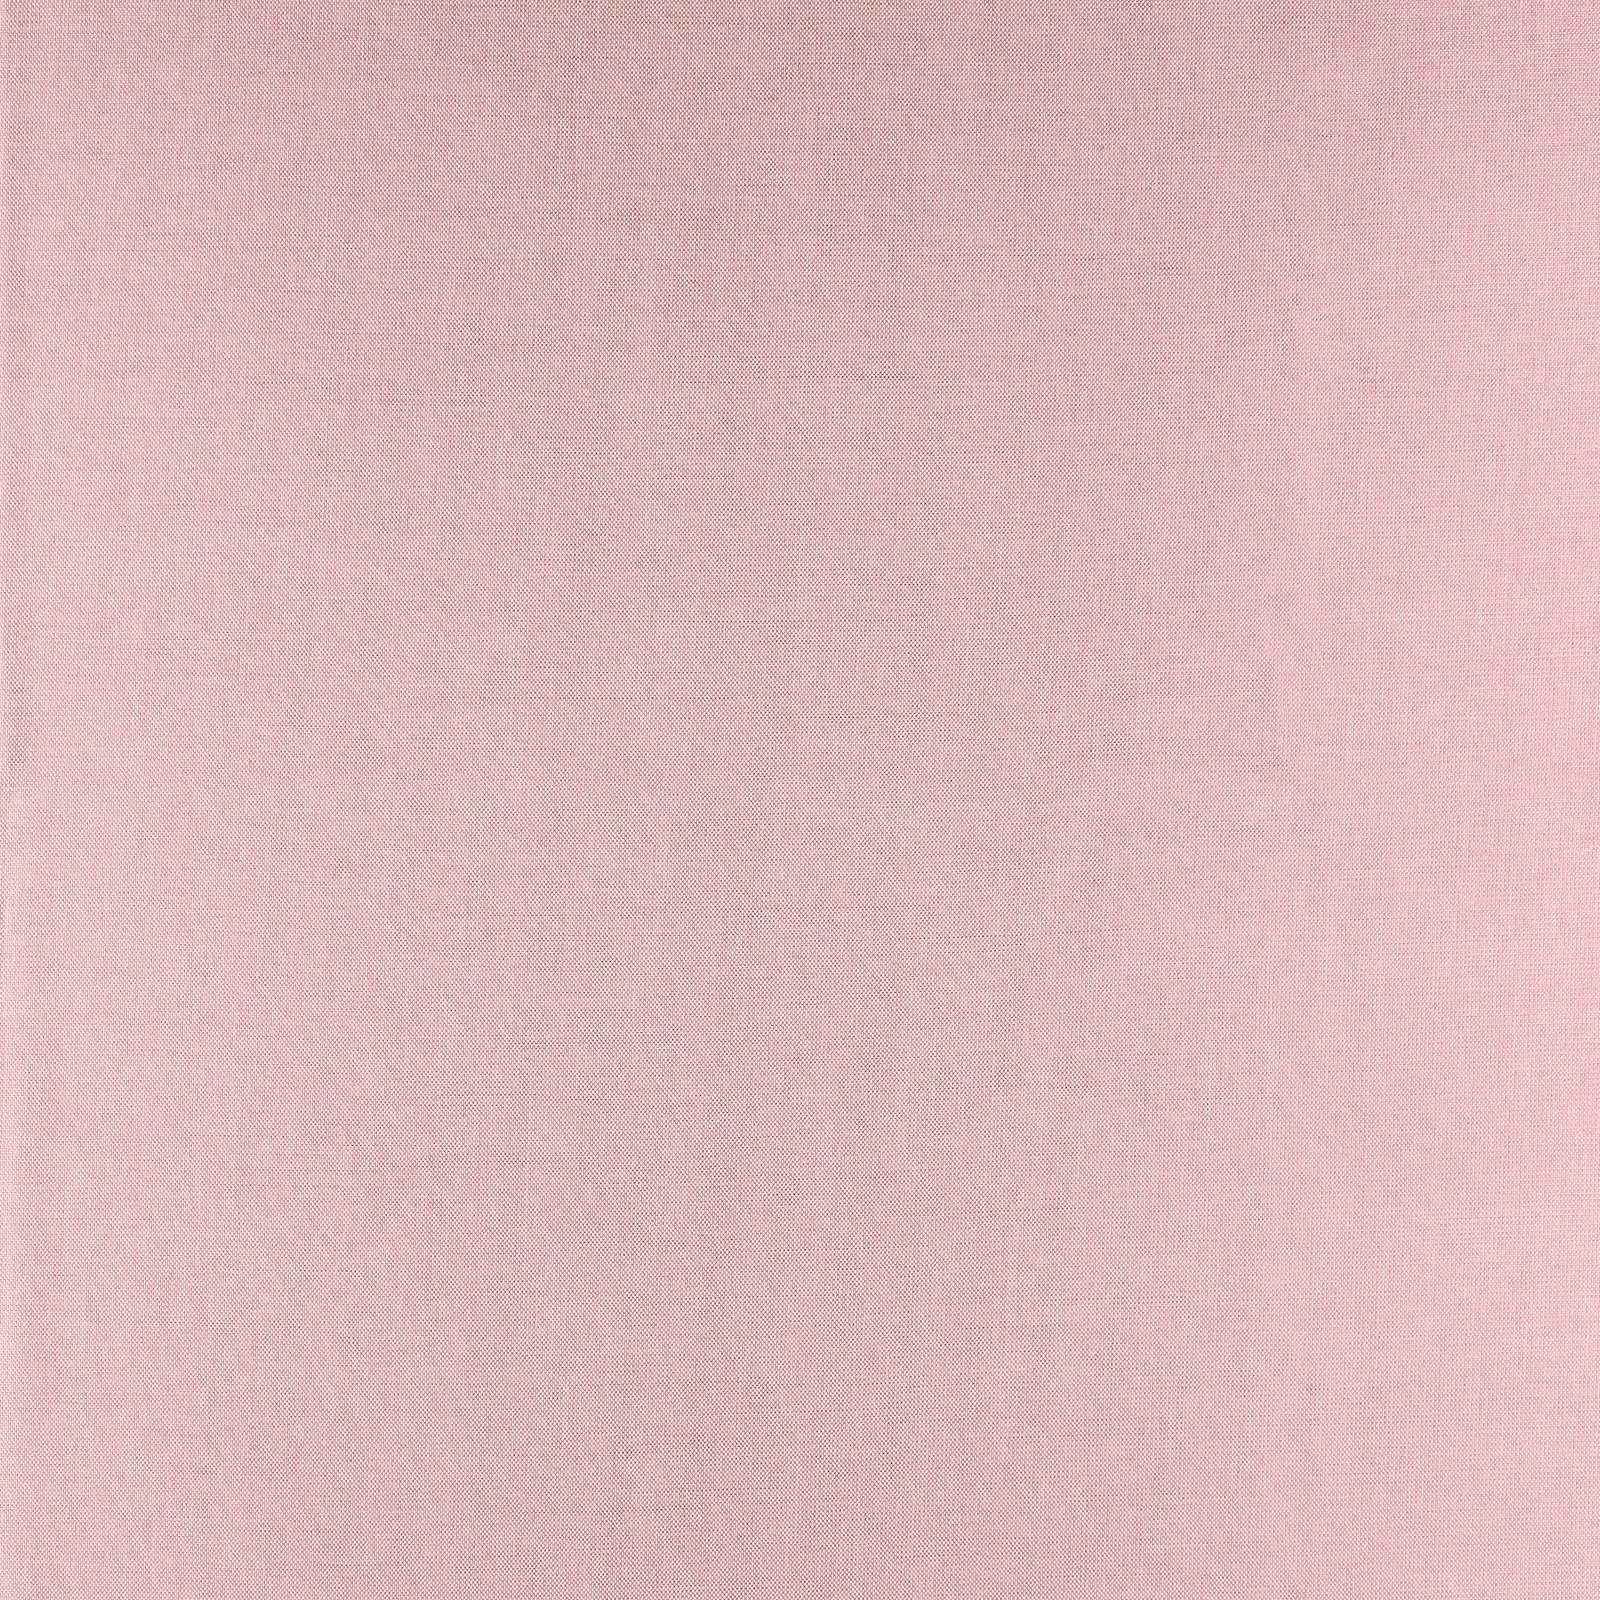 Upholstery fabric baby pink melange 826588_pack_solid